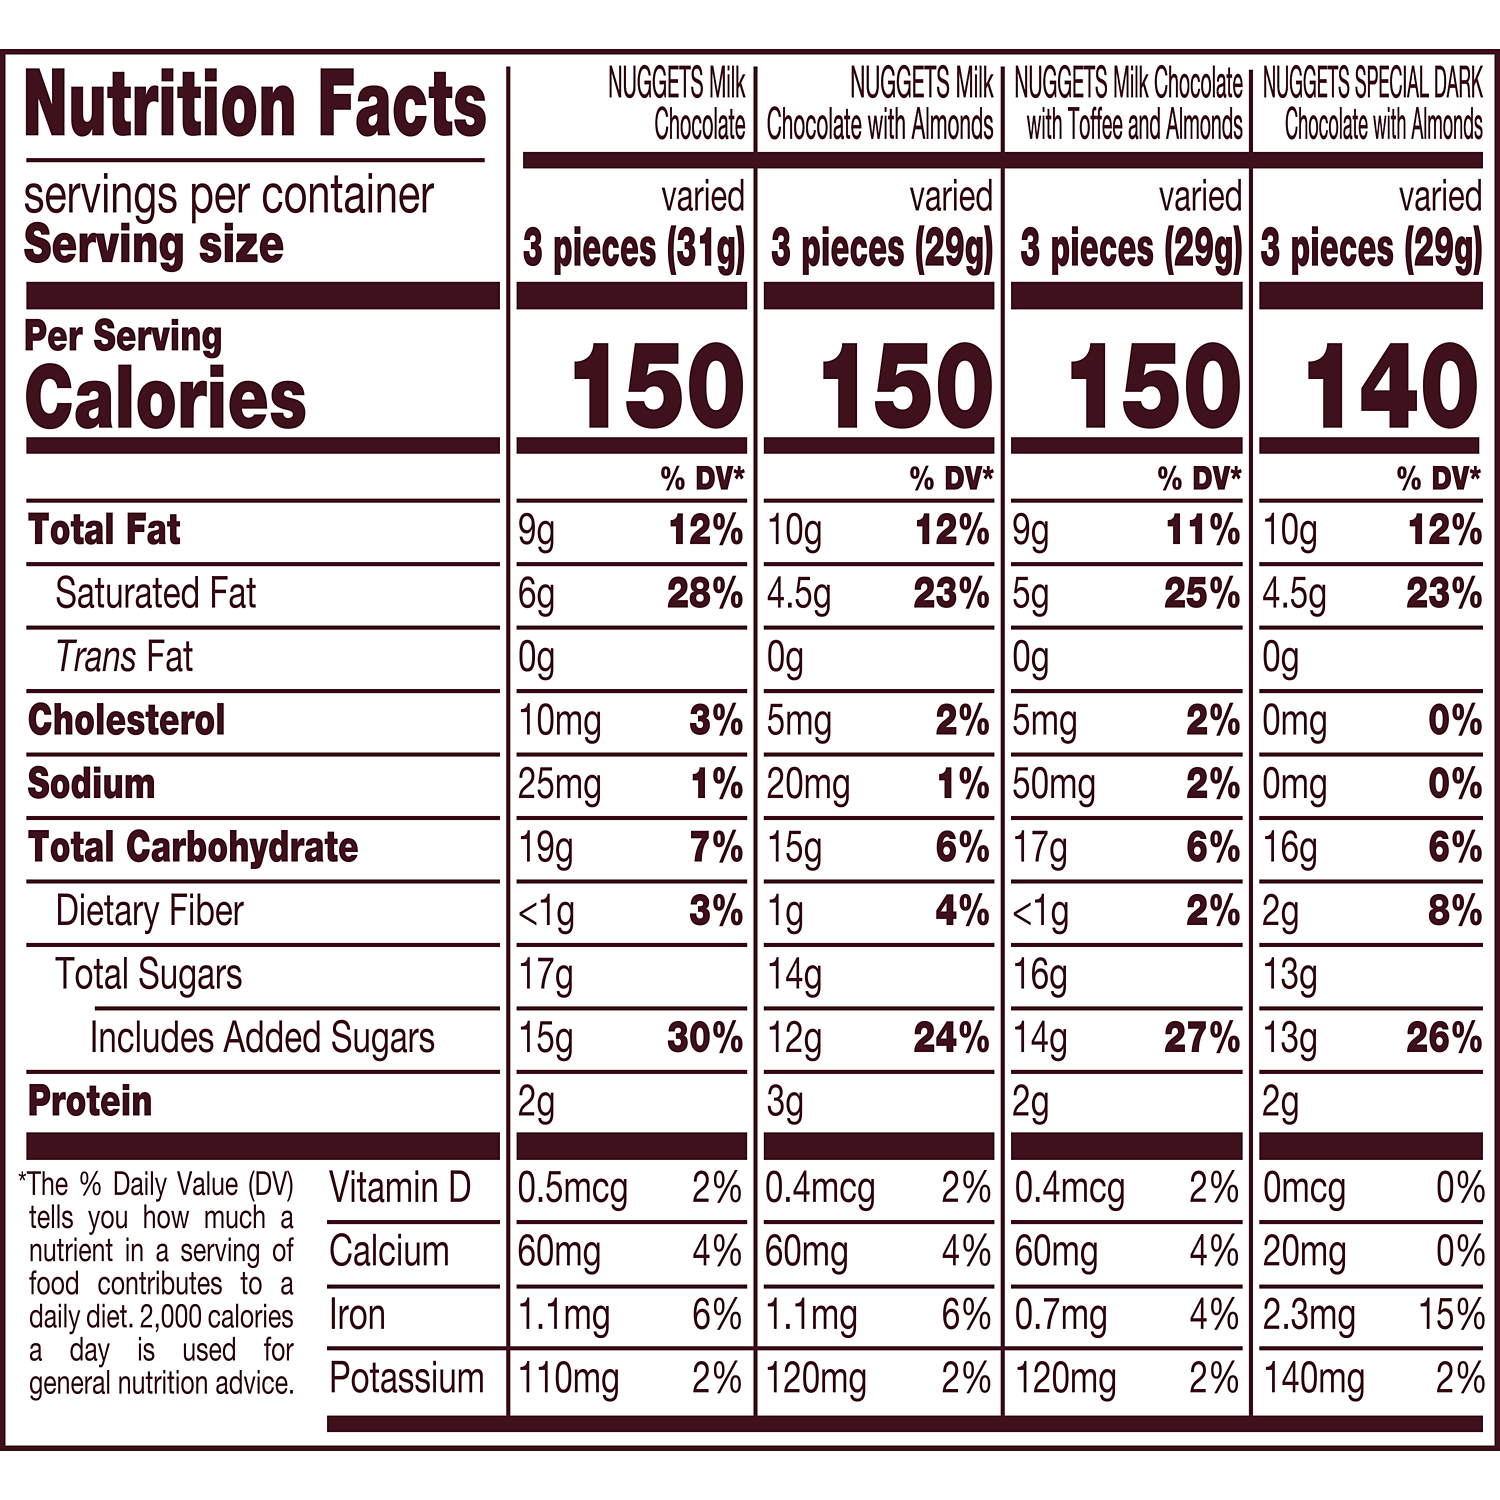 HERSHEY'S NUGGETS Assortment, 15.6 oz pack - Nutritional Facts